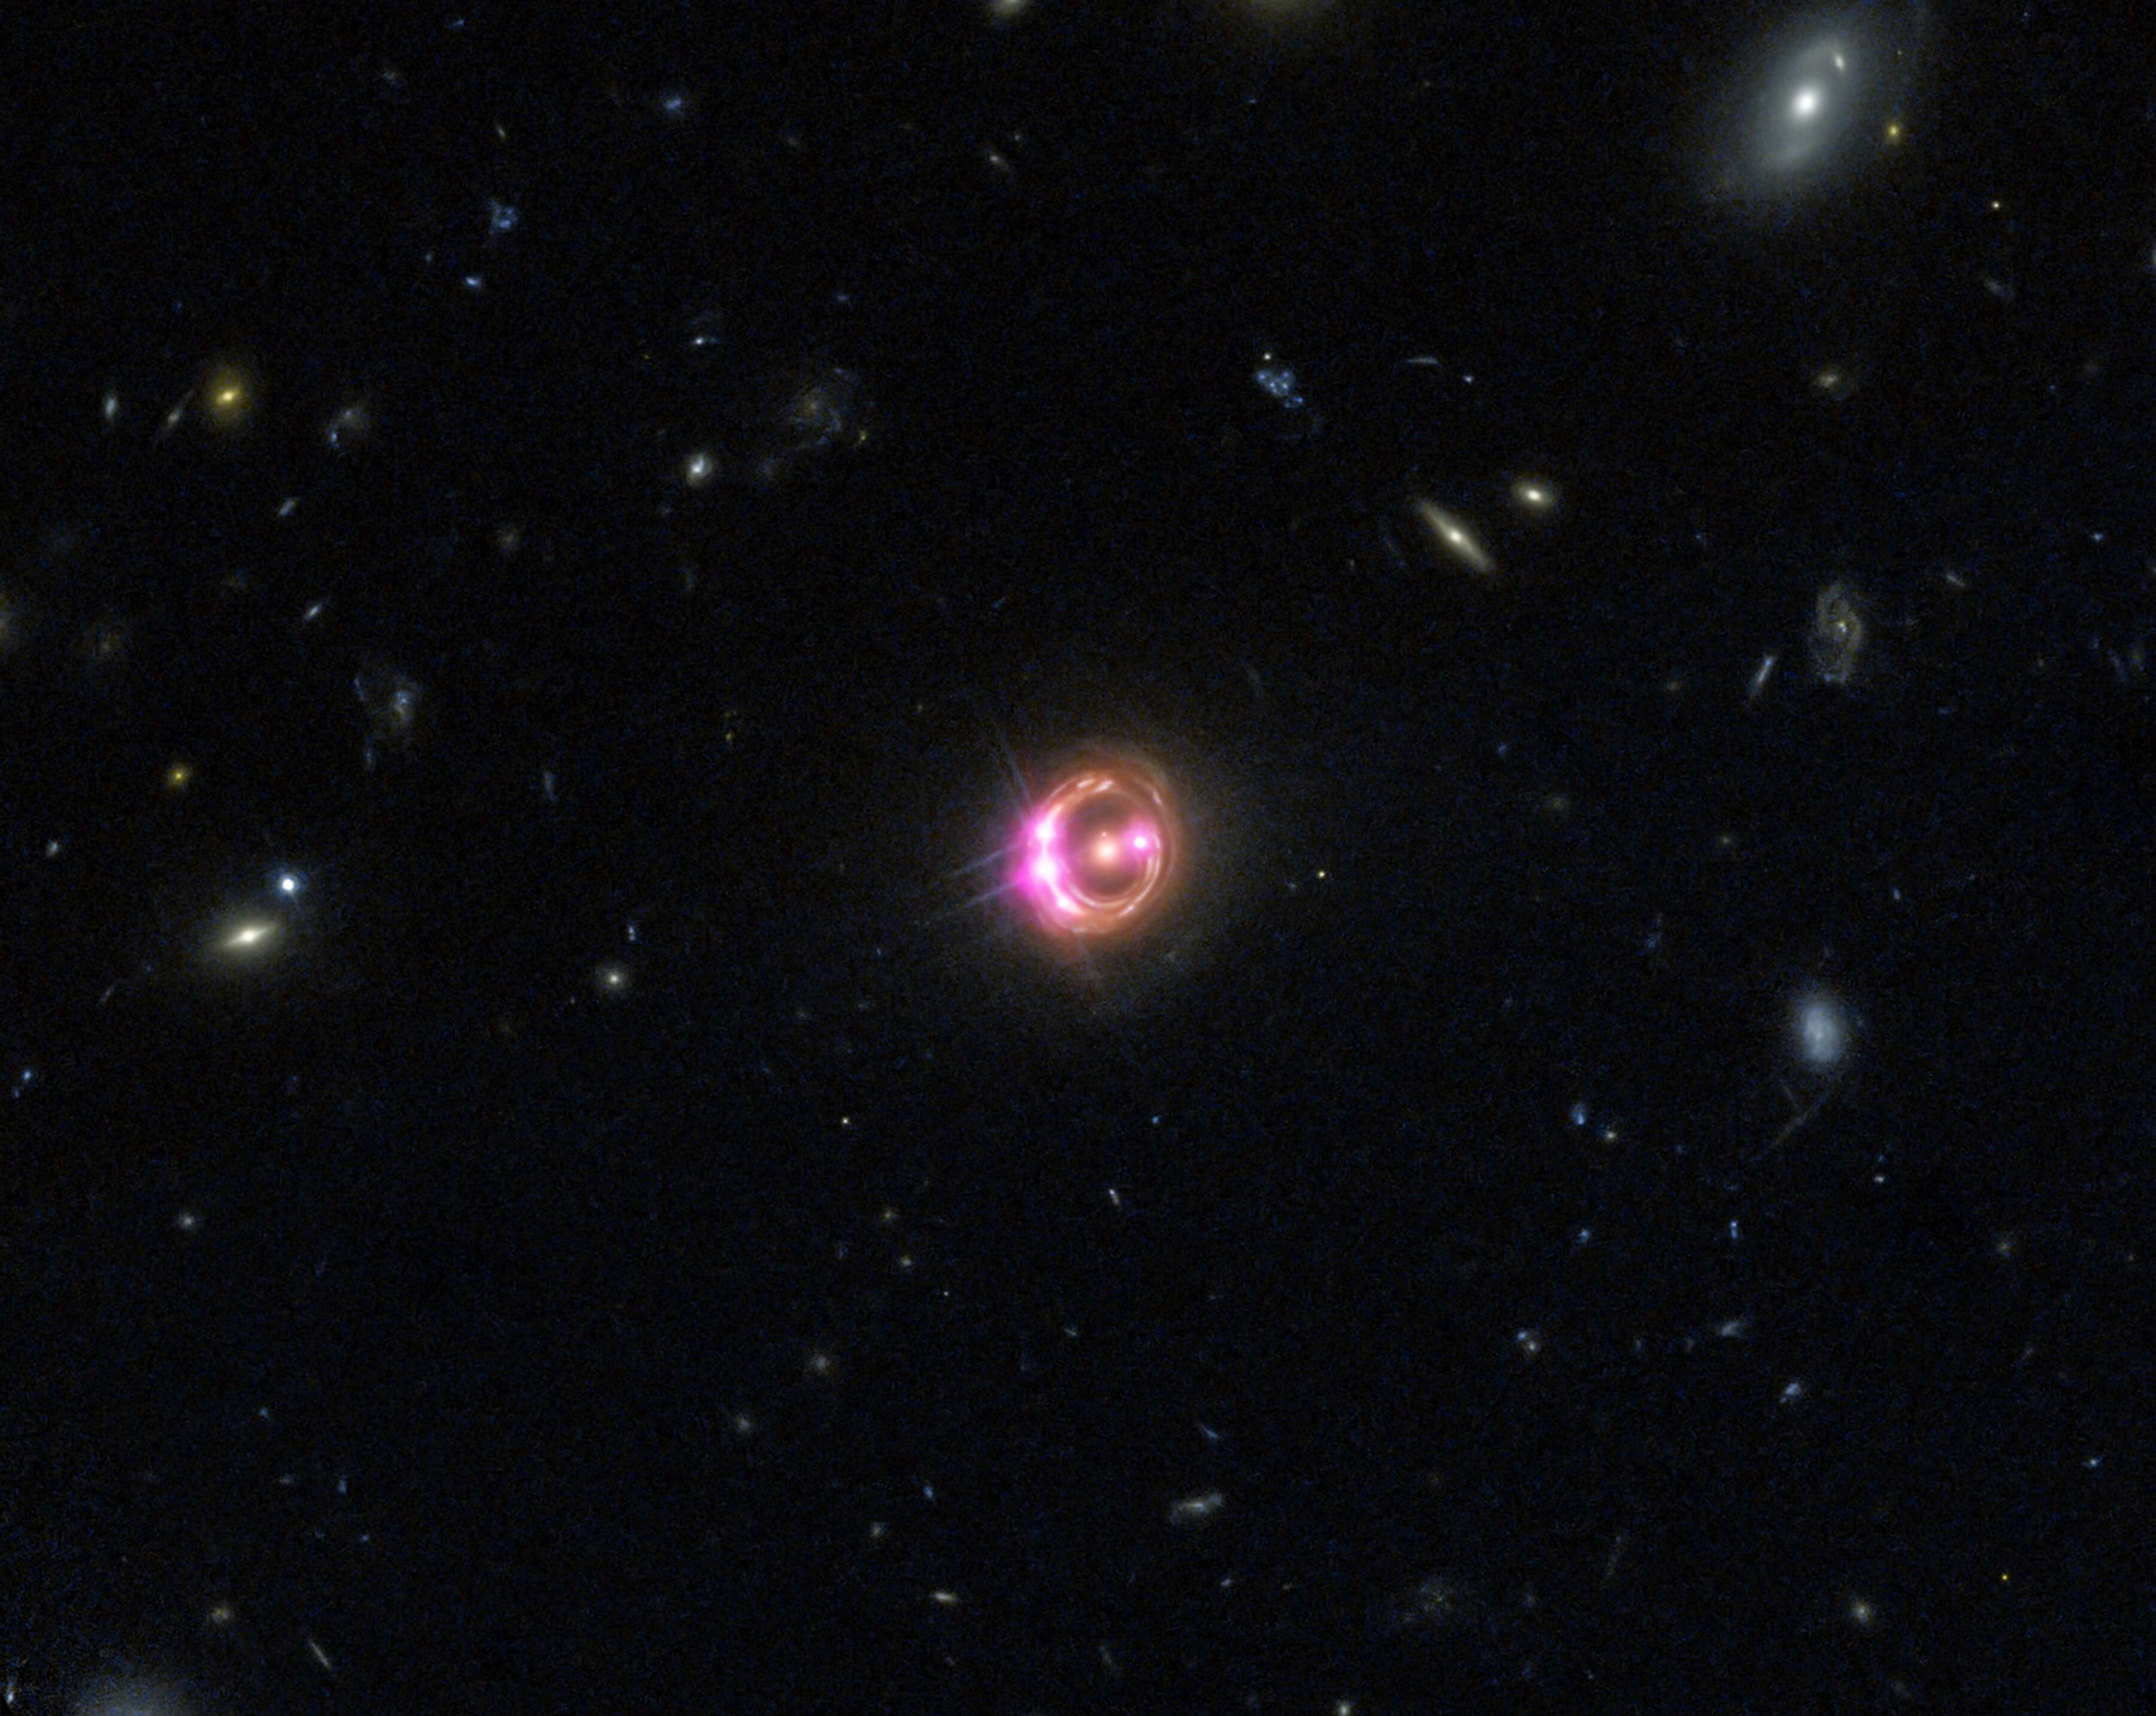 Combining separate observations of the Hubble space telescopes in visible light, and Chandra and Newton in X-radiation on the same quasar made it possible to distinguish more details. X-ray image: NASA/CXC/University of Michigan RCReis et al. Optical NASA/Space Telescope Science Institute